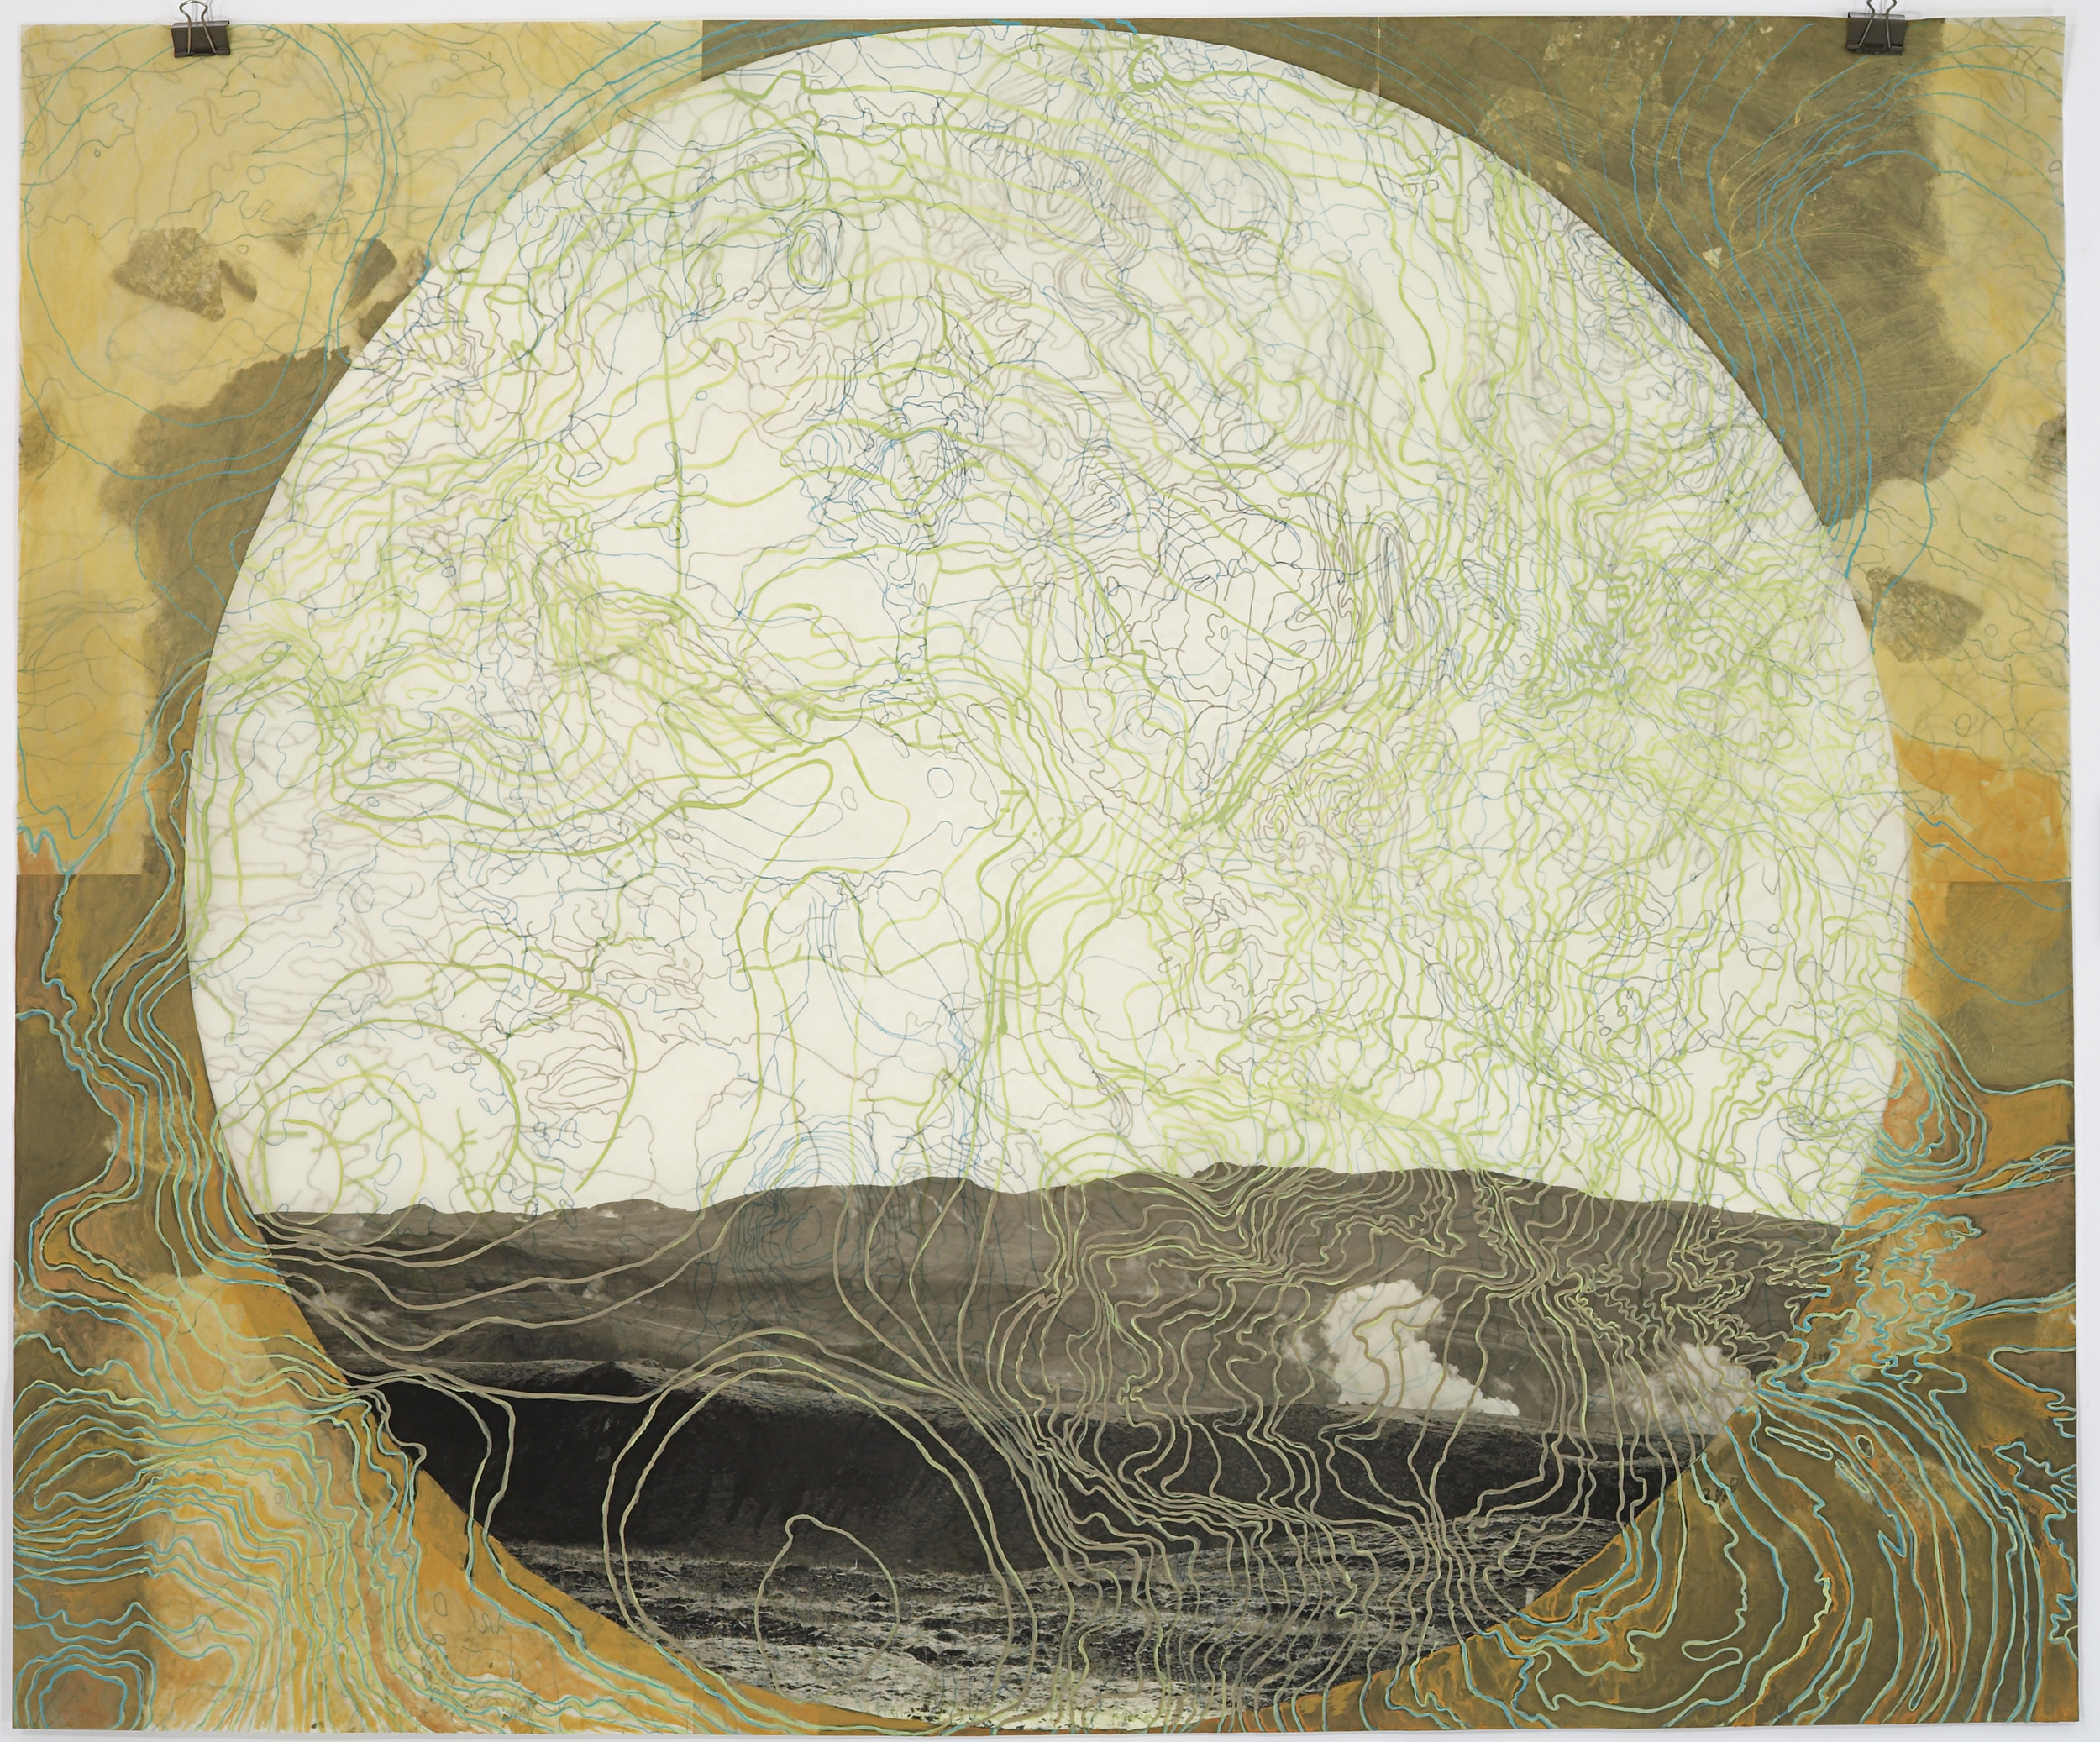    Geothermal Topography V, &nbsp;2007   Photogravure on kozo shi, digital pigment print, oil paint and wax in layers   42” X 45"  